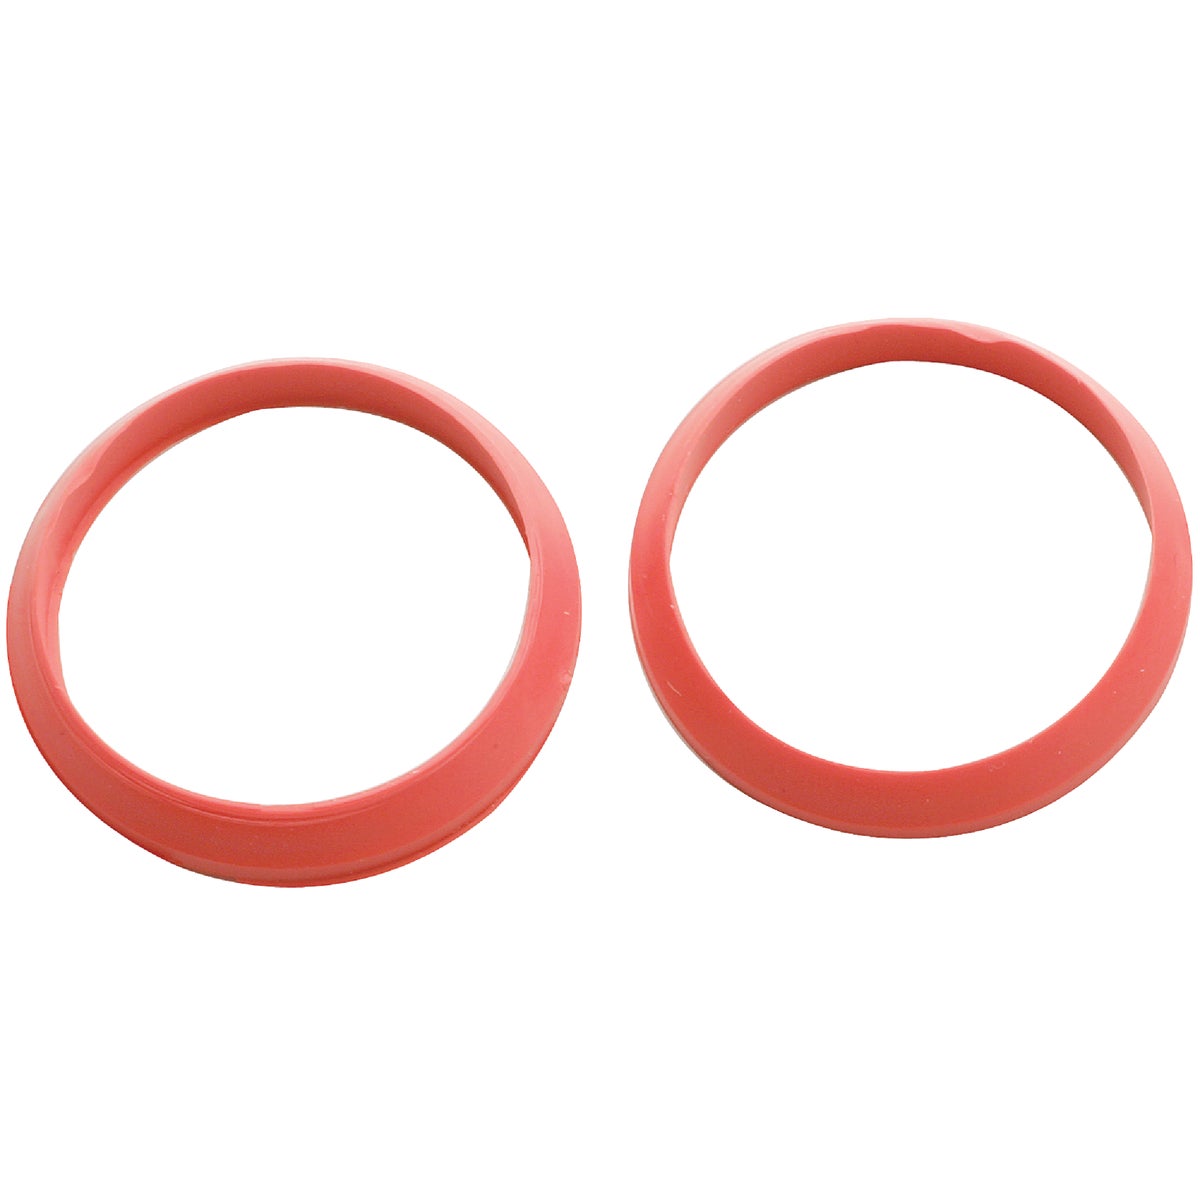 Item 405207, Rubber slip-joint washers.